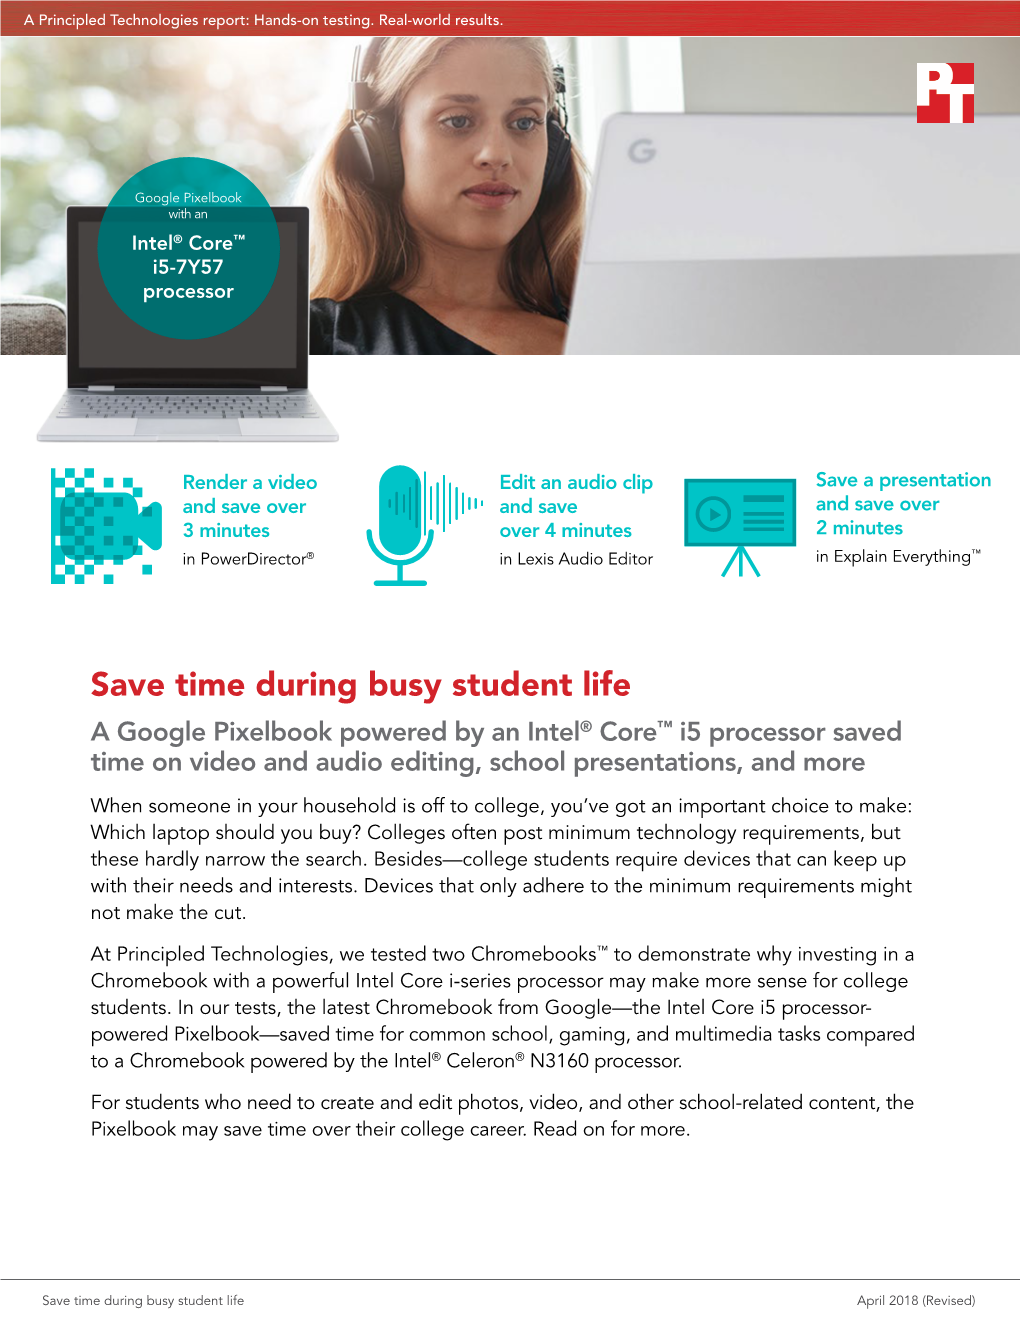 Save Time During Busy Student Life